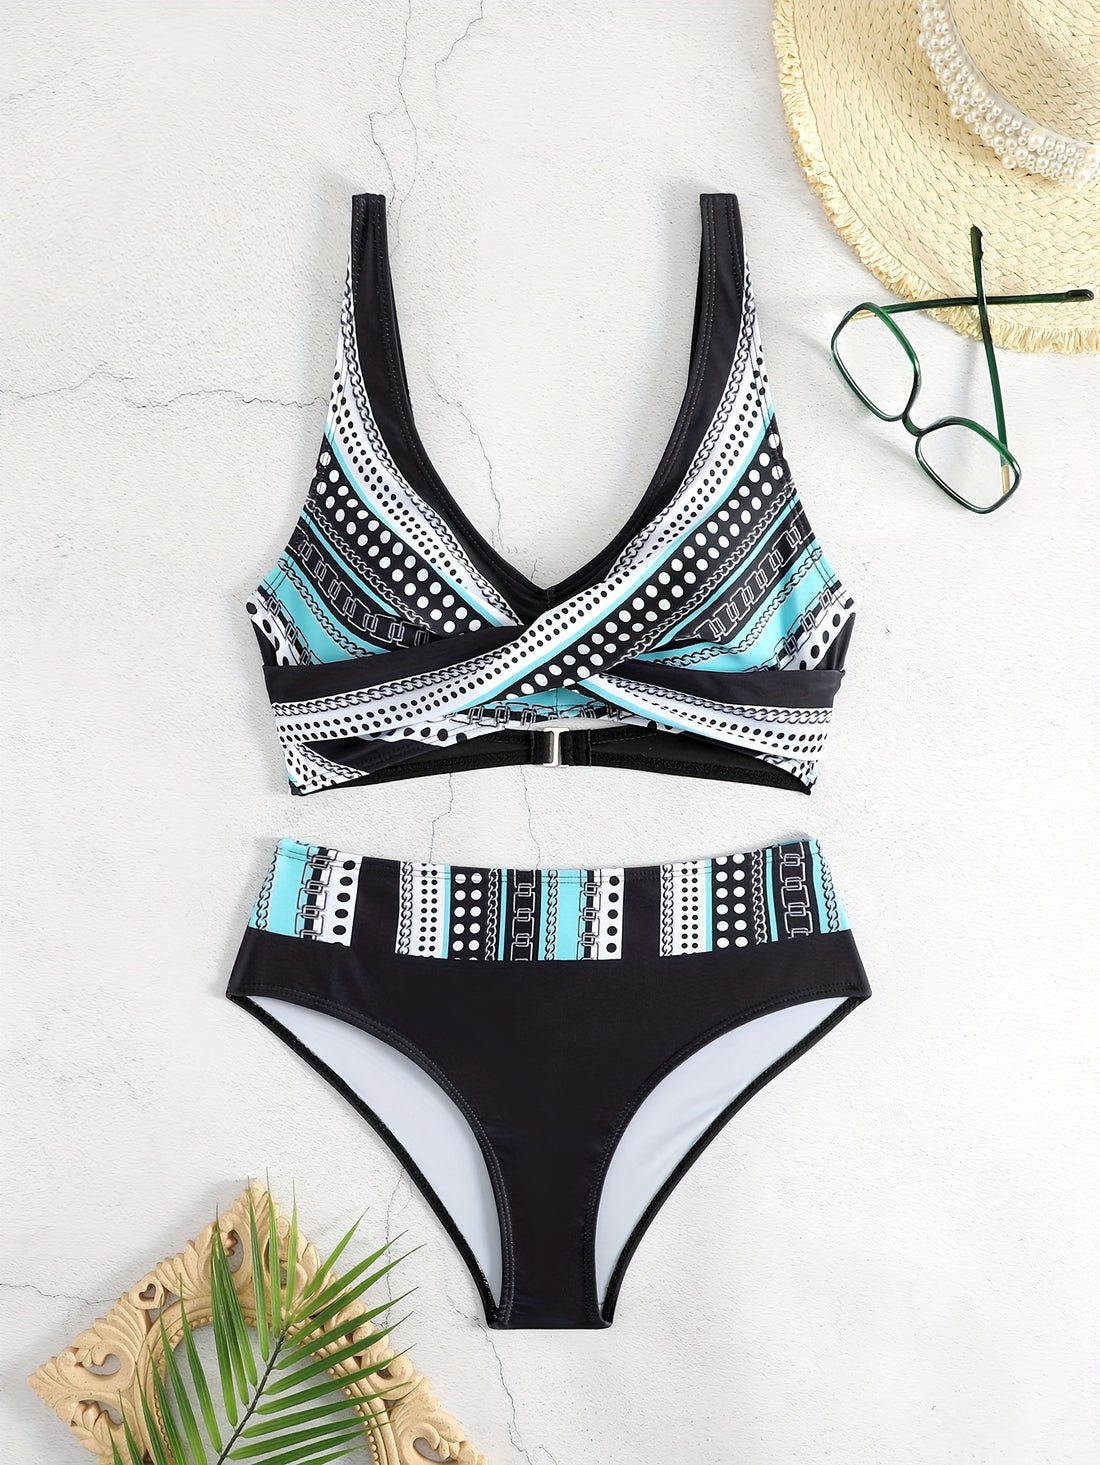 2 piece Women's Striped Cut Out Bikini Set with V-Neck Ring Detail and Medium Stretch - Stylish Swimwear for a Flattering Beach Look